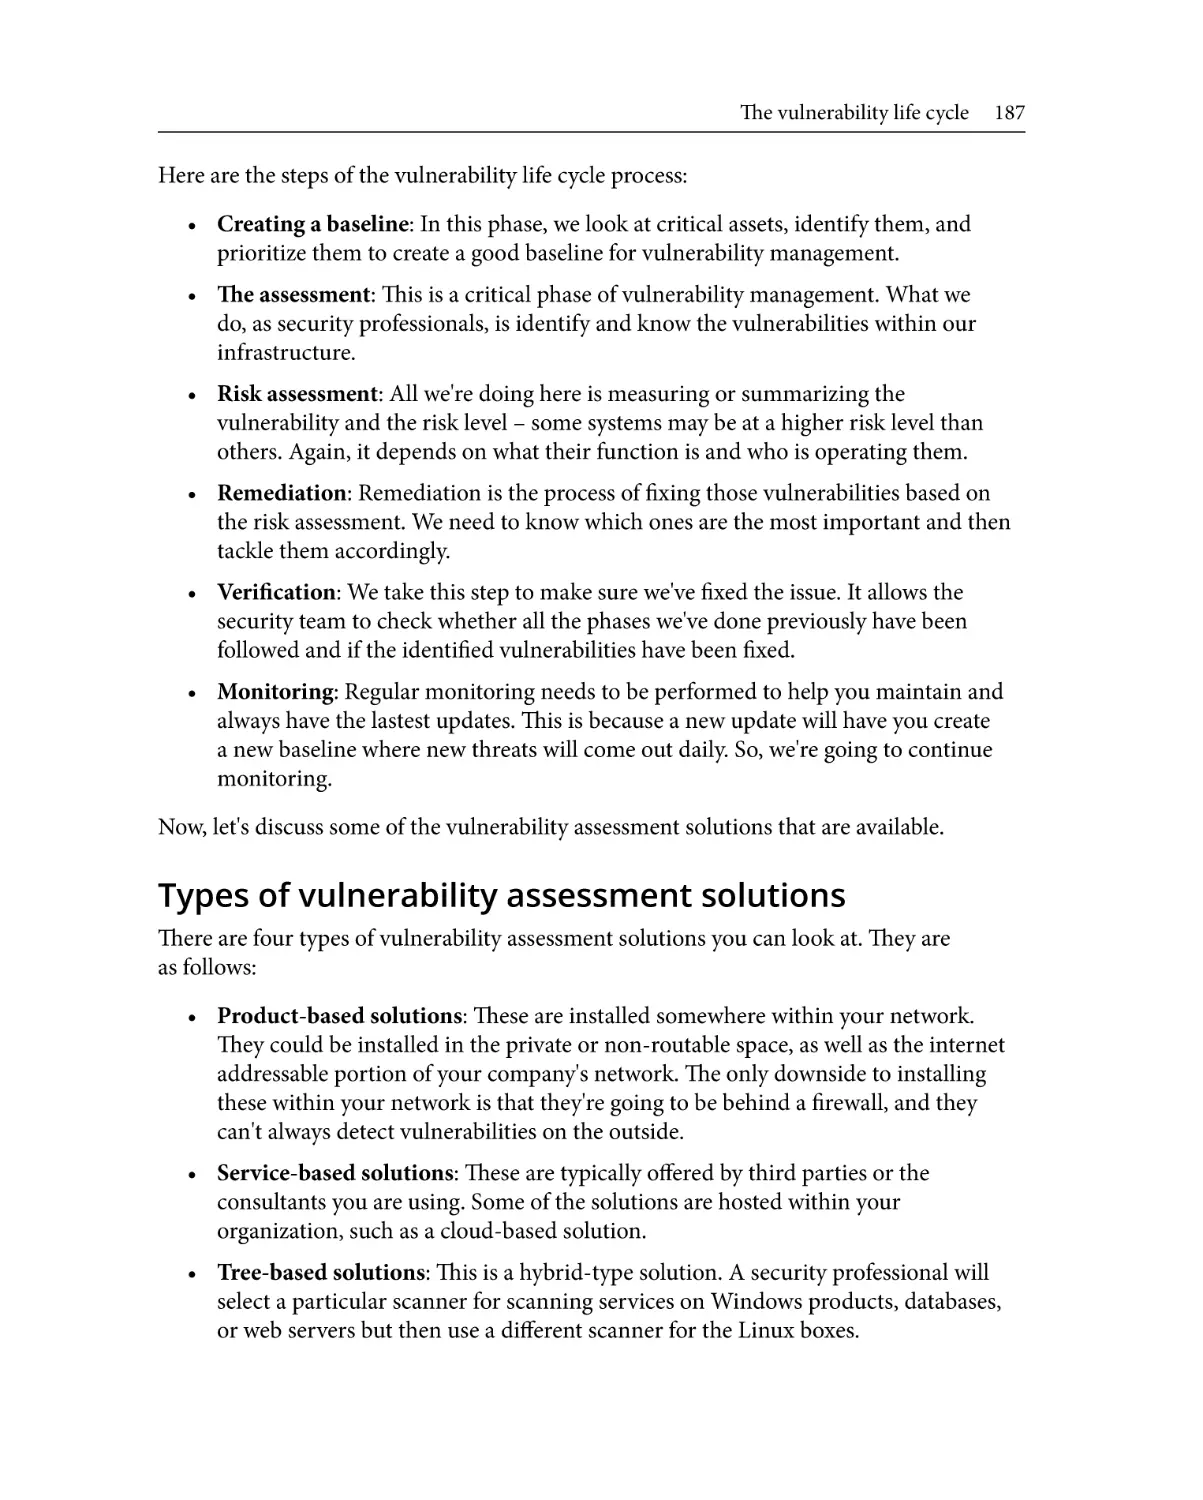 Types of vulnerability assessment solutions